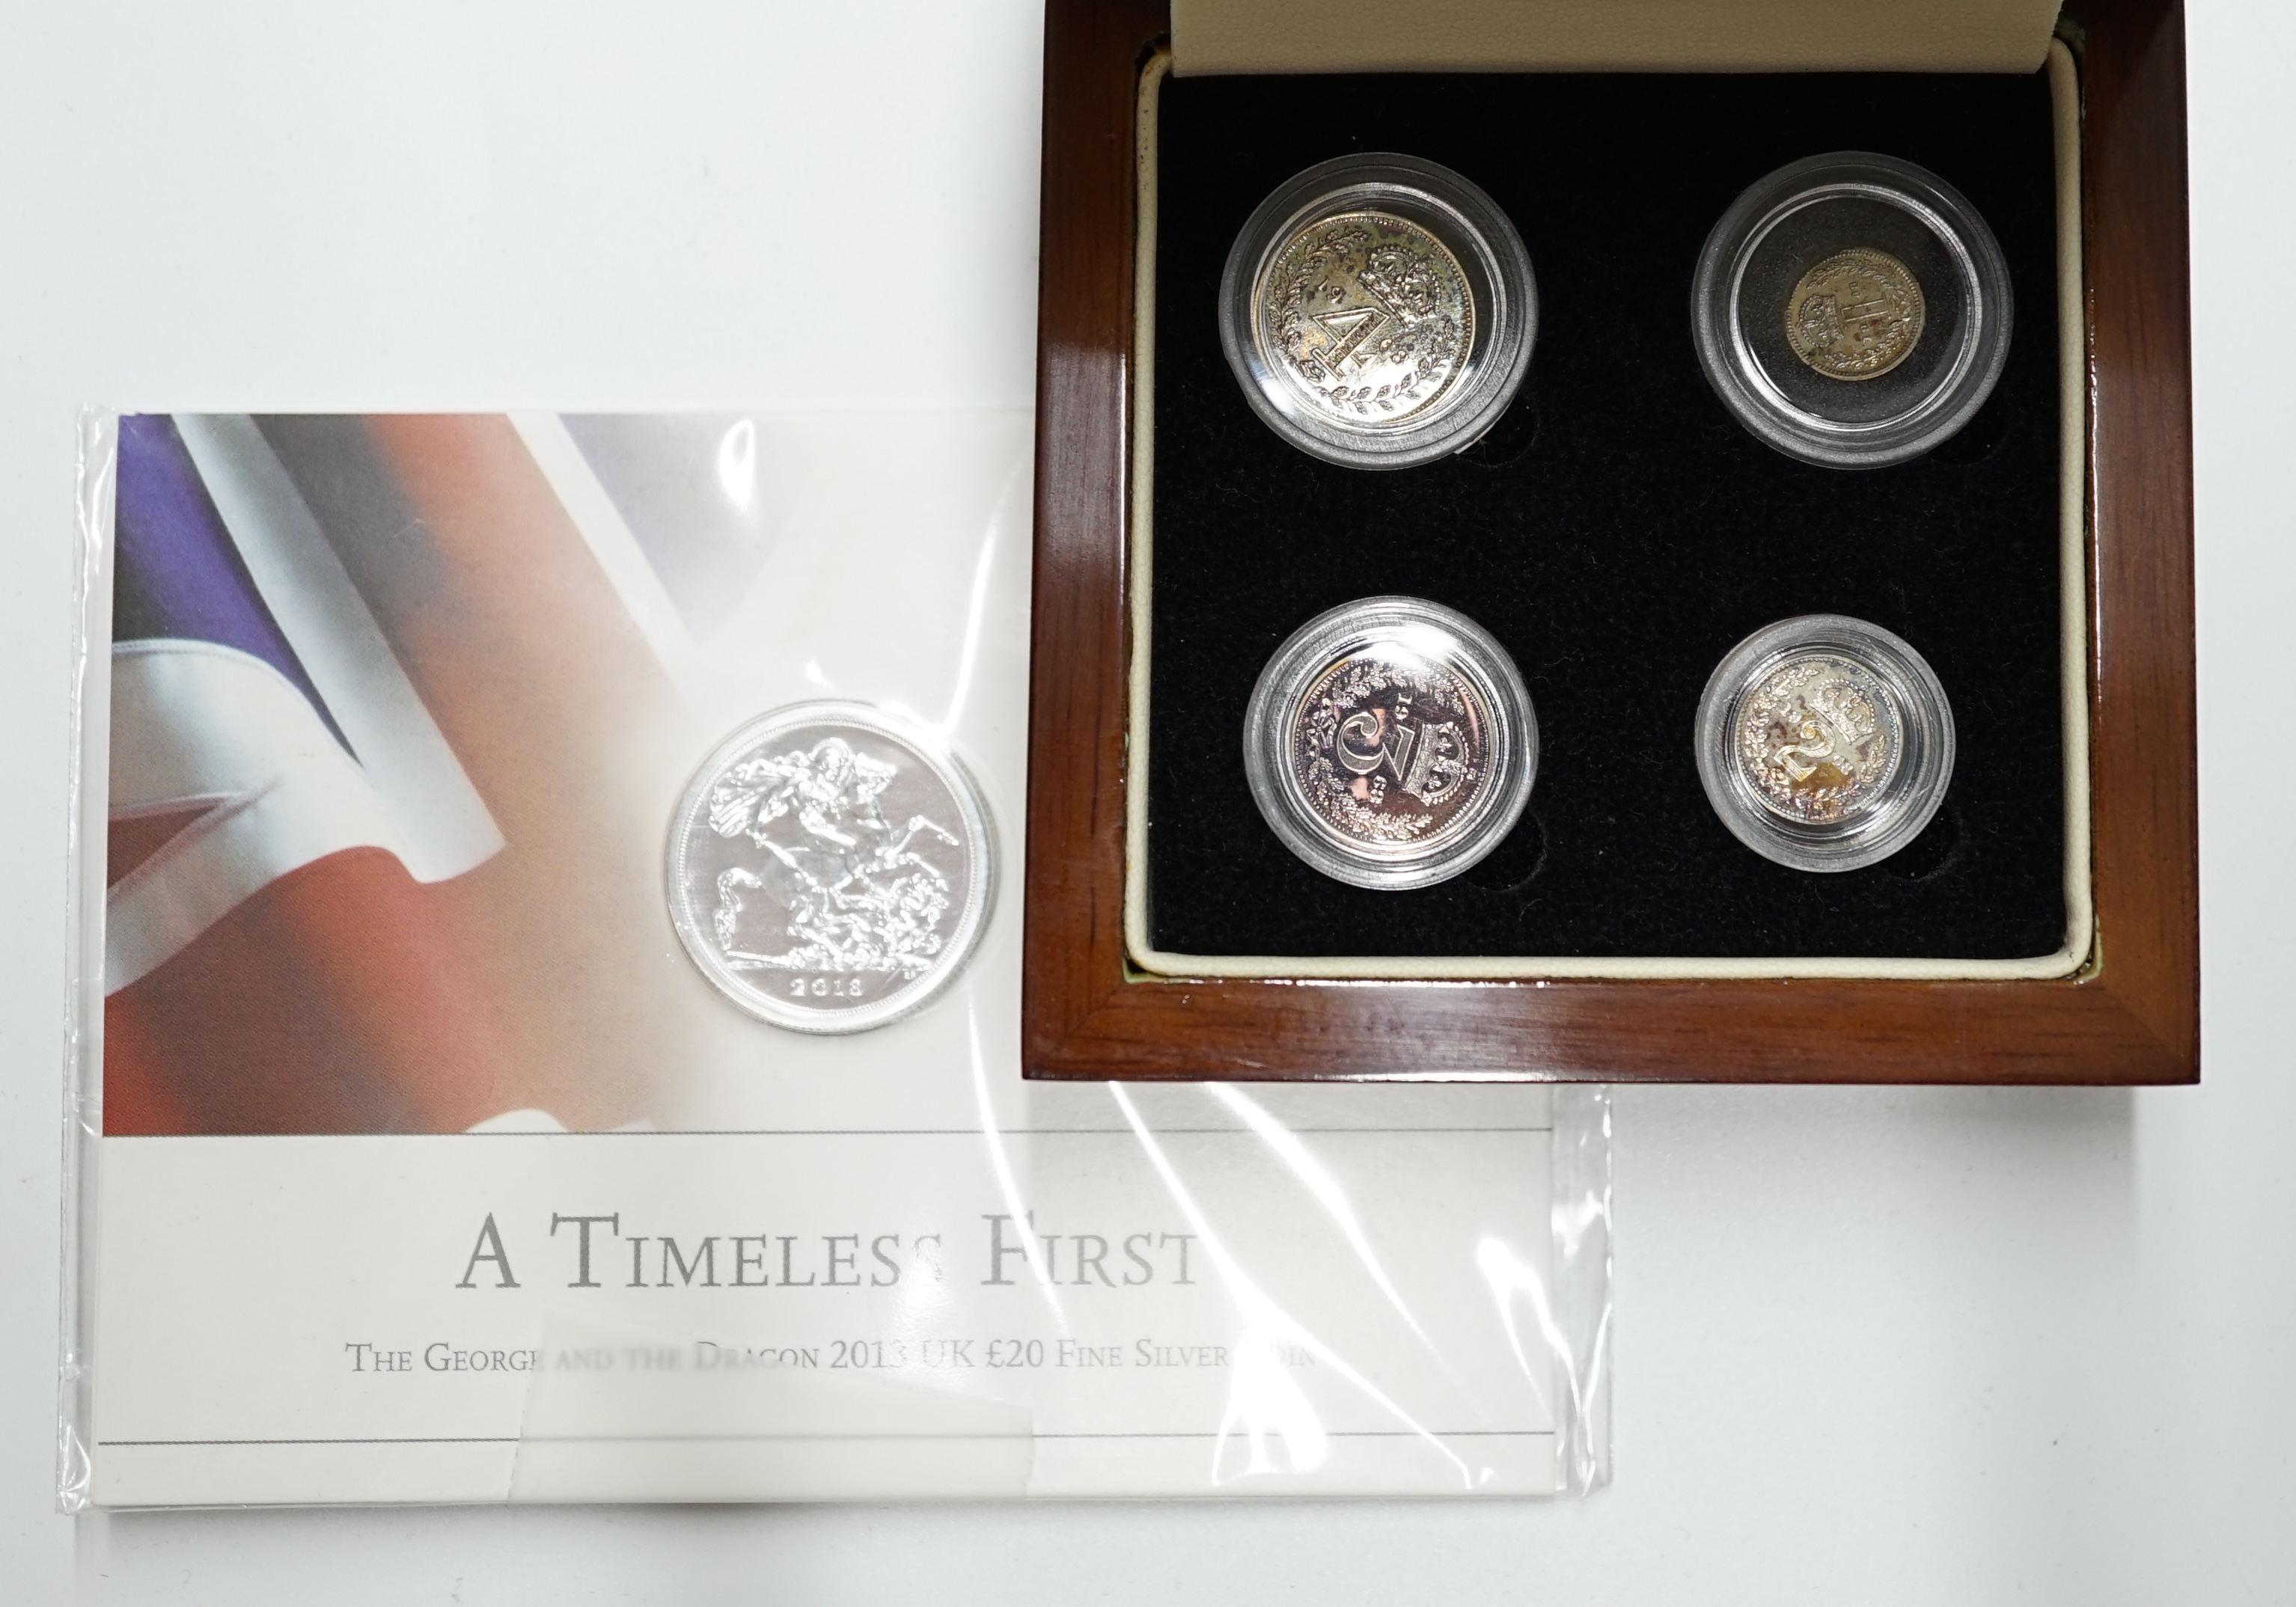 British silver coins, Elizabeth II four coin set of Maundy coins, 1968, toned UNC, in London mint case and a 2013 fine silver £20 coin, St. George & The Dragon (2)